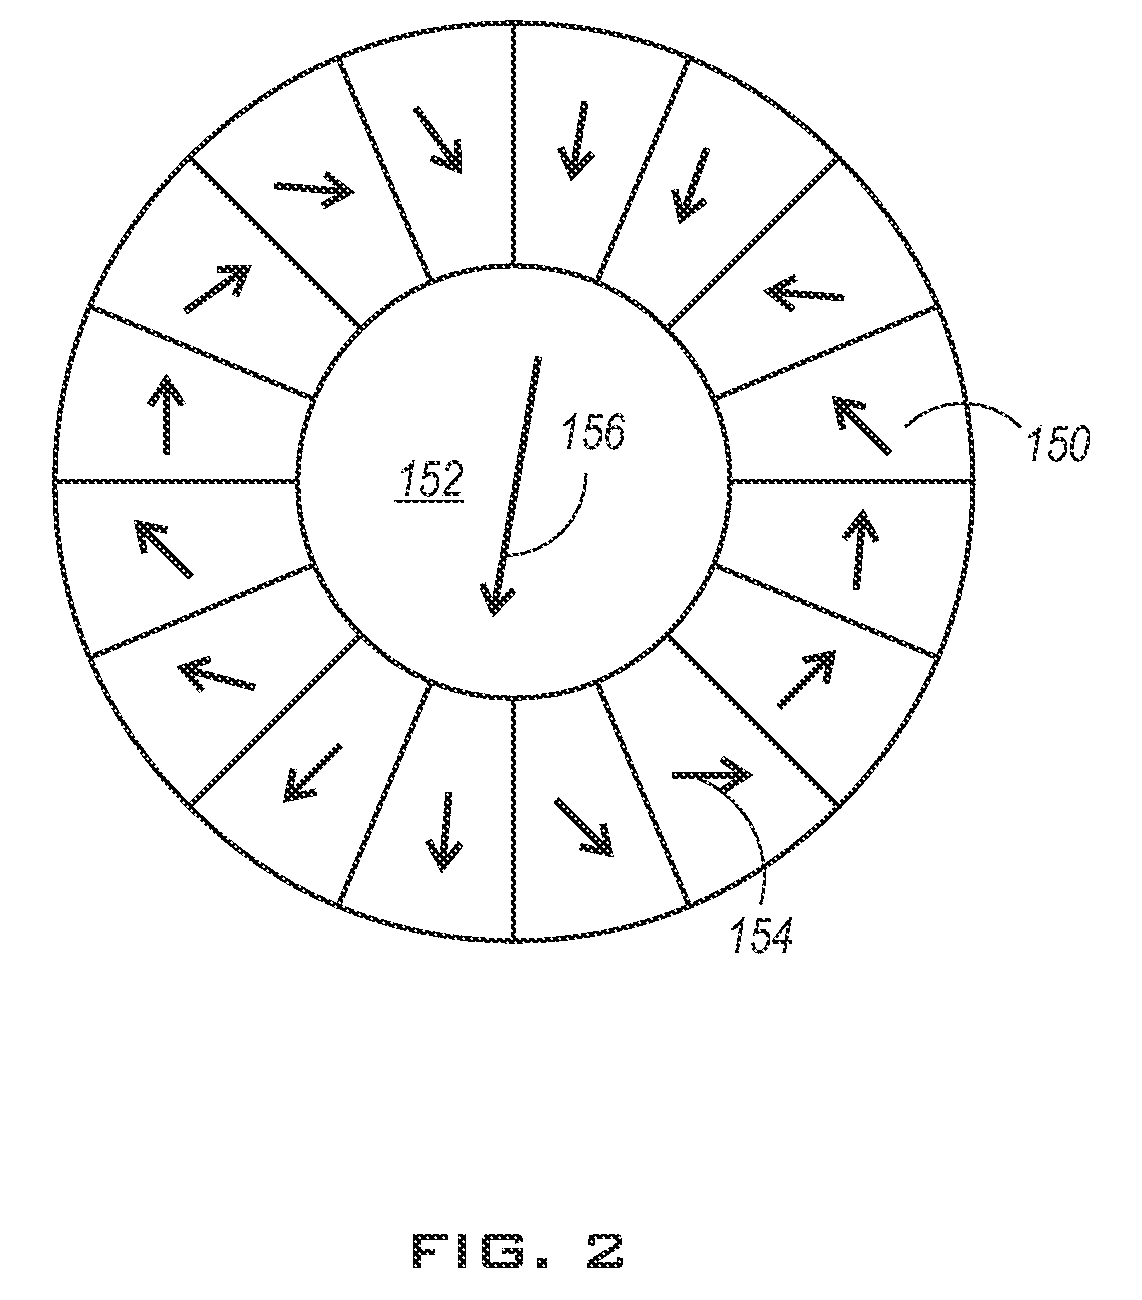 NMR system and method having a permanent magnet providing a rotating magnetic field